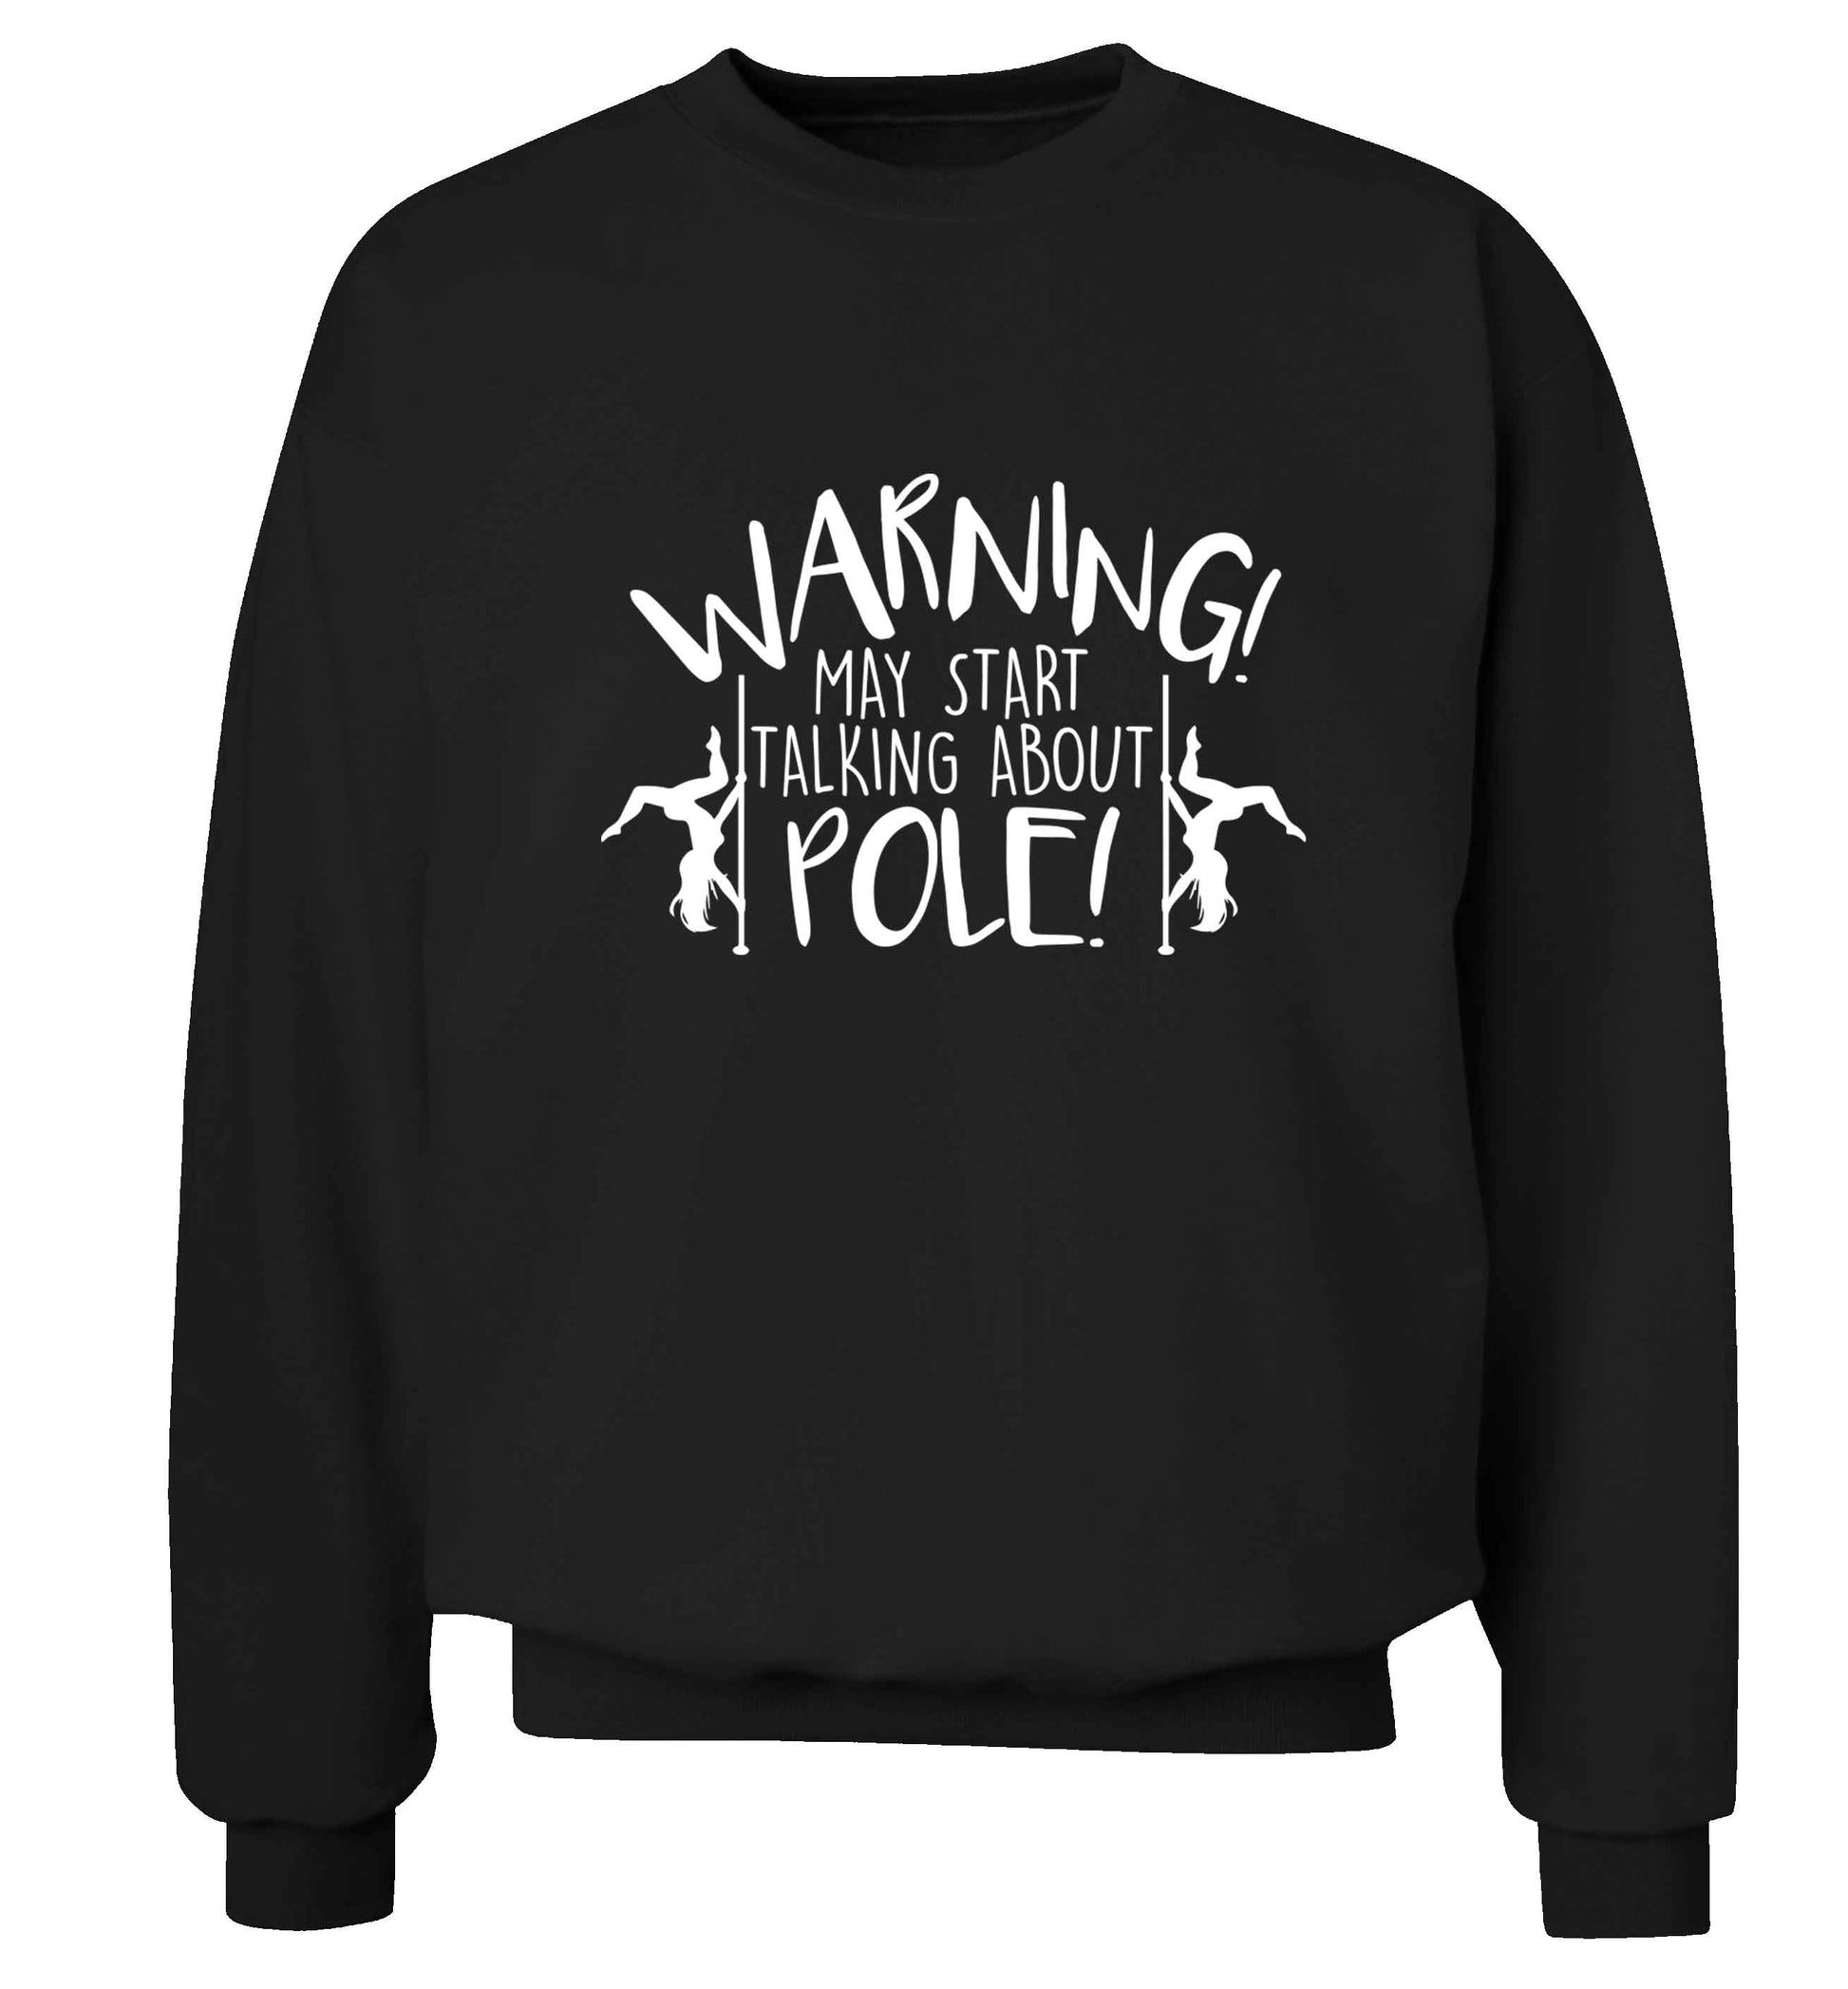 Warning may start talking about pole  adult's unisex black sweater 2XL